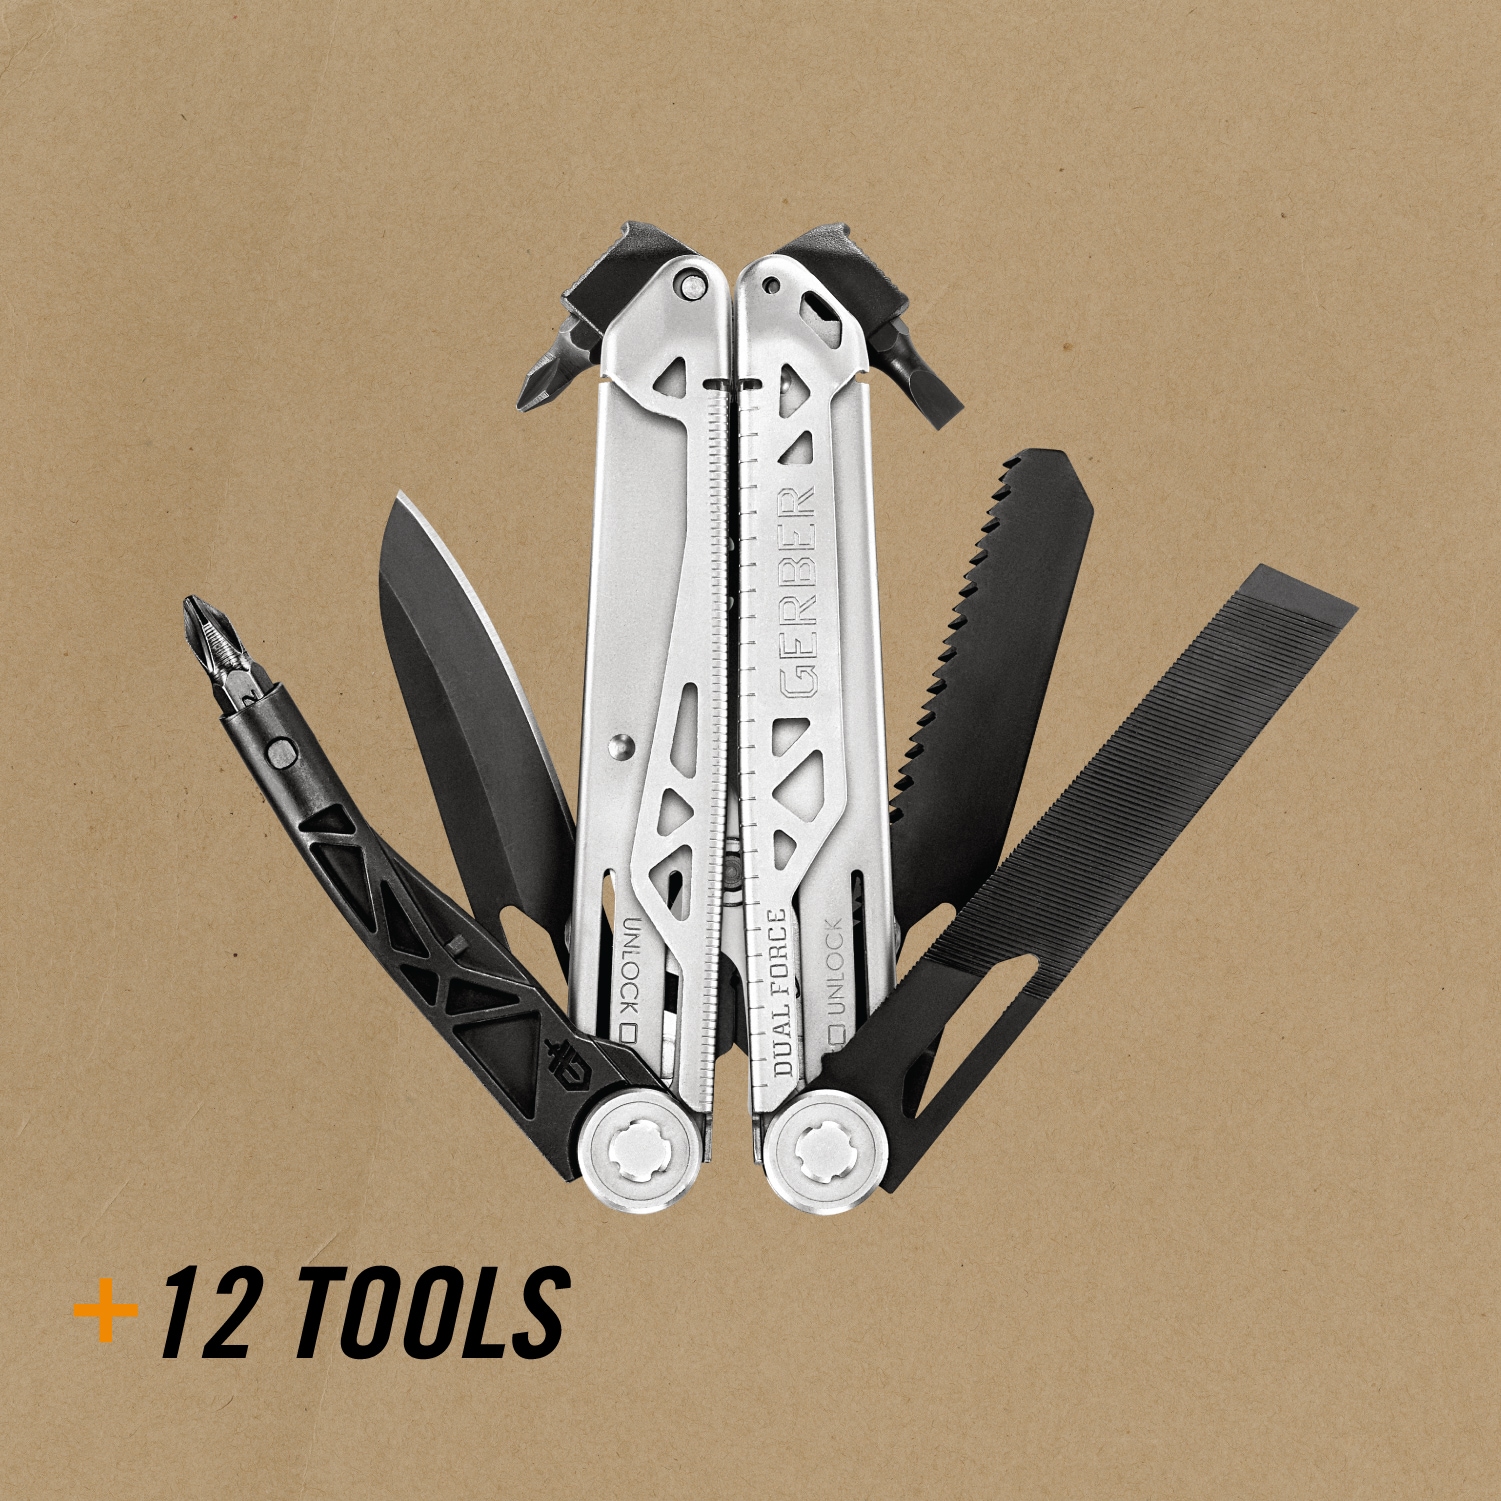 Gerber - Multitool Dual-Force™ - 12 tools - 30-001613 best price, check  availability, buy online with